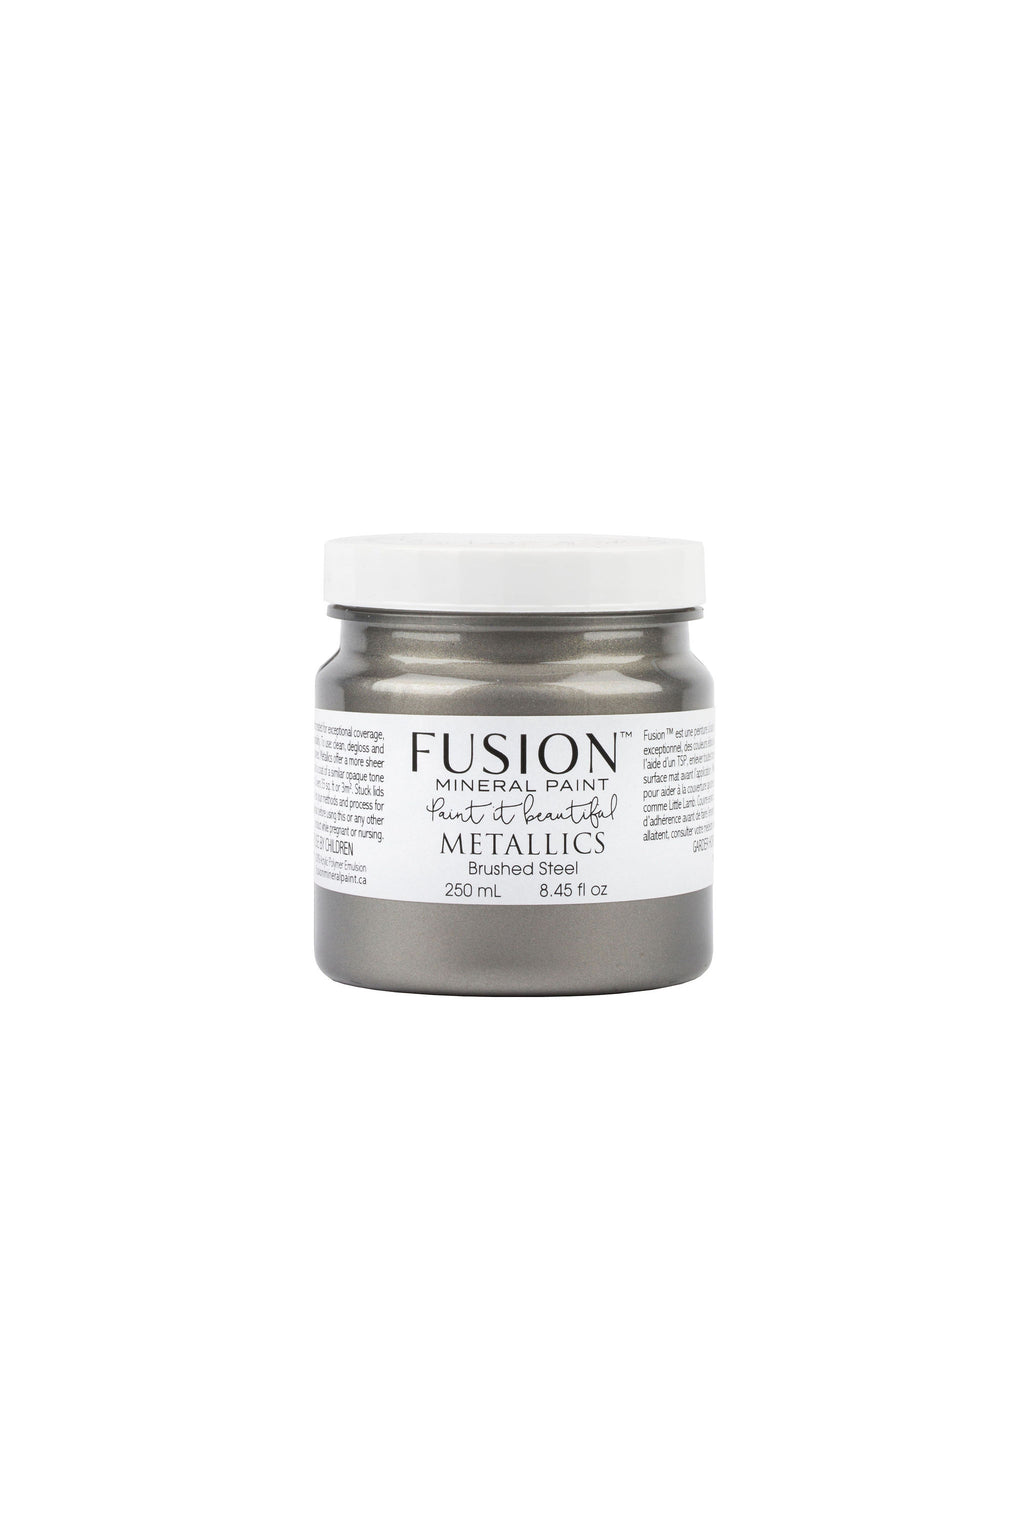 Brushed Steel Metallic Fusion Mineral Paint 260 ml